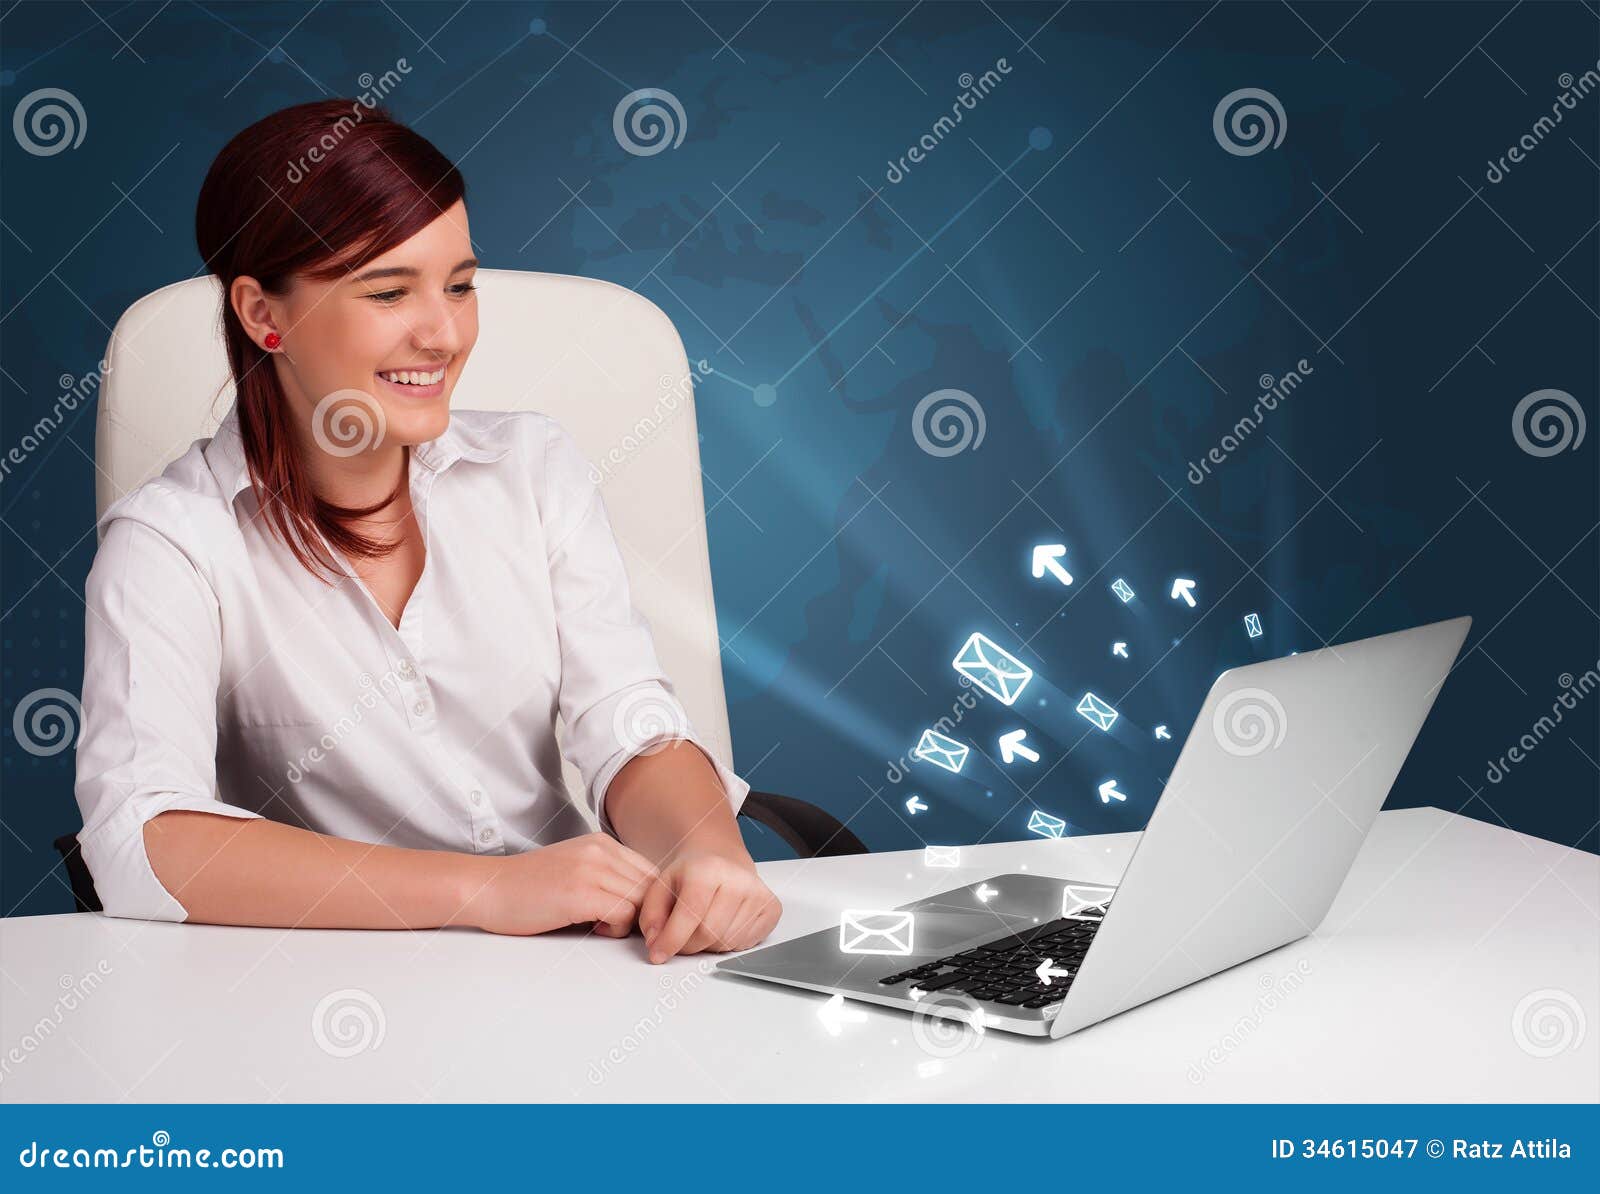 Pretty young lady sitting at dest and typing on laptop with message icons comming out